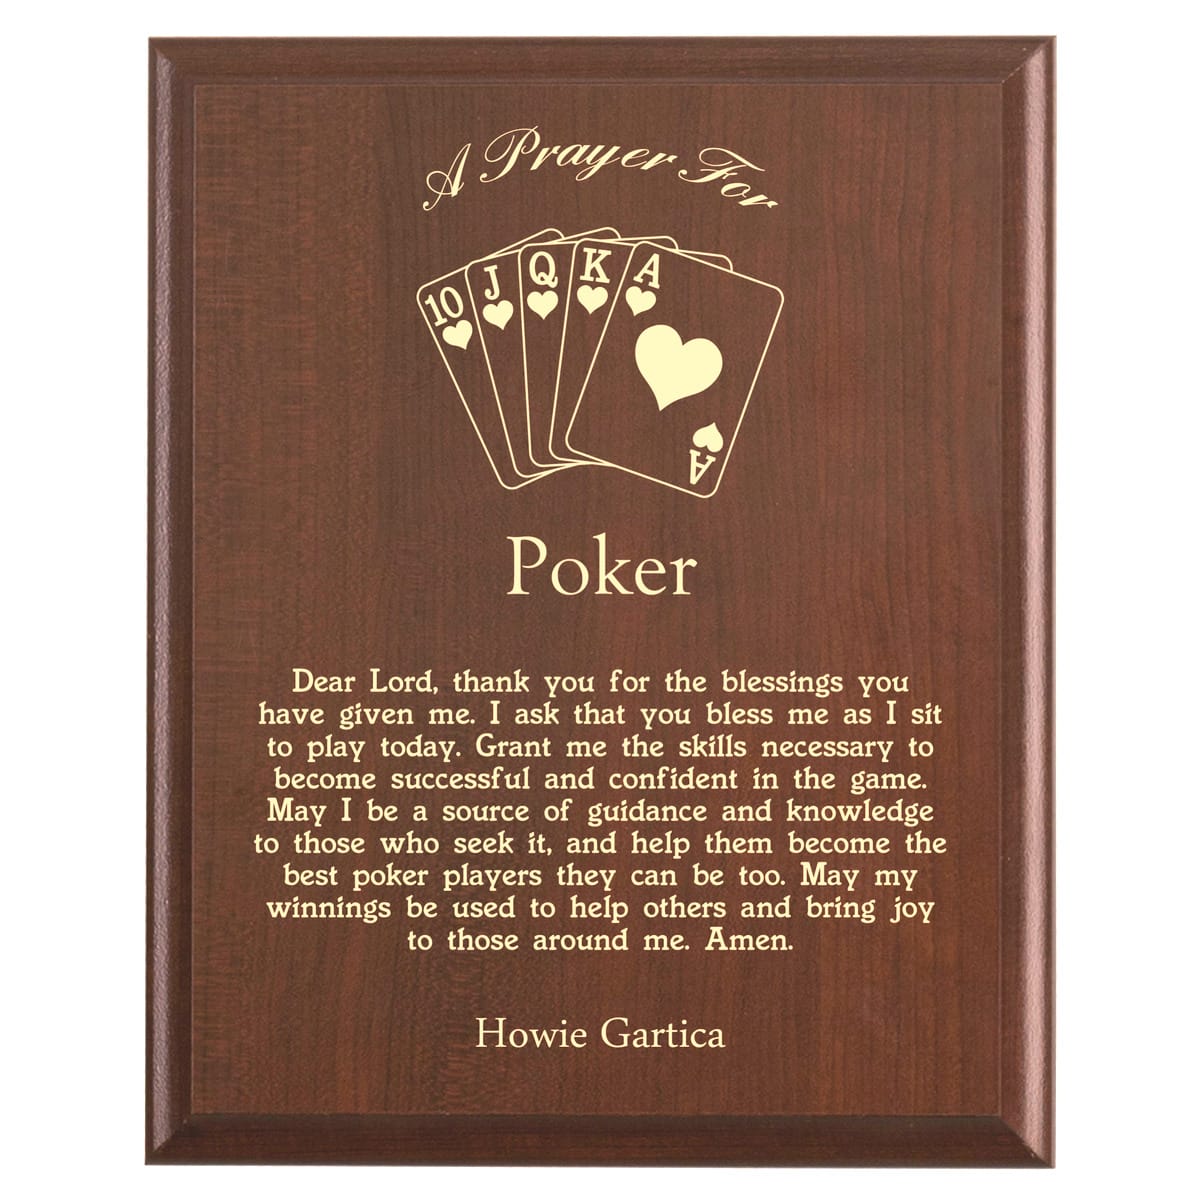 Plaque photo: Poker Prayer Plaque design with free personalization. Wood style finish with customized text.